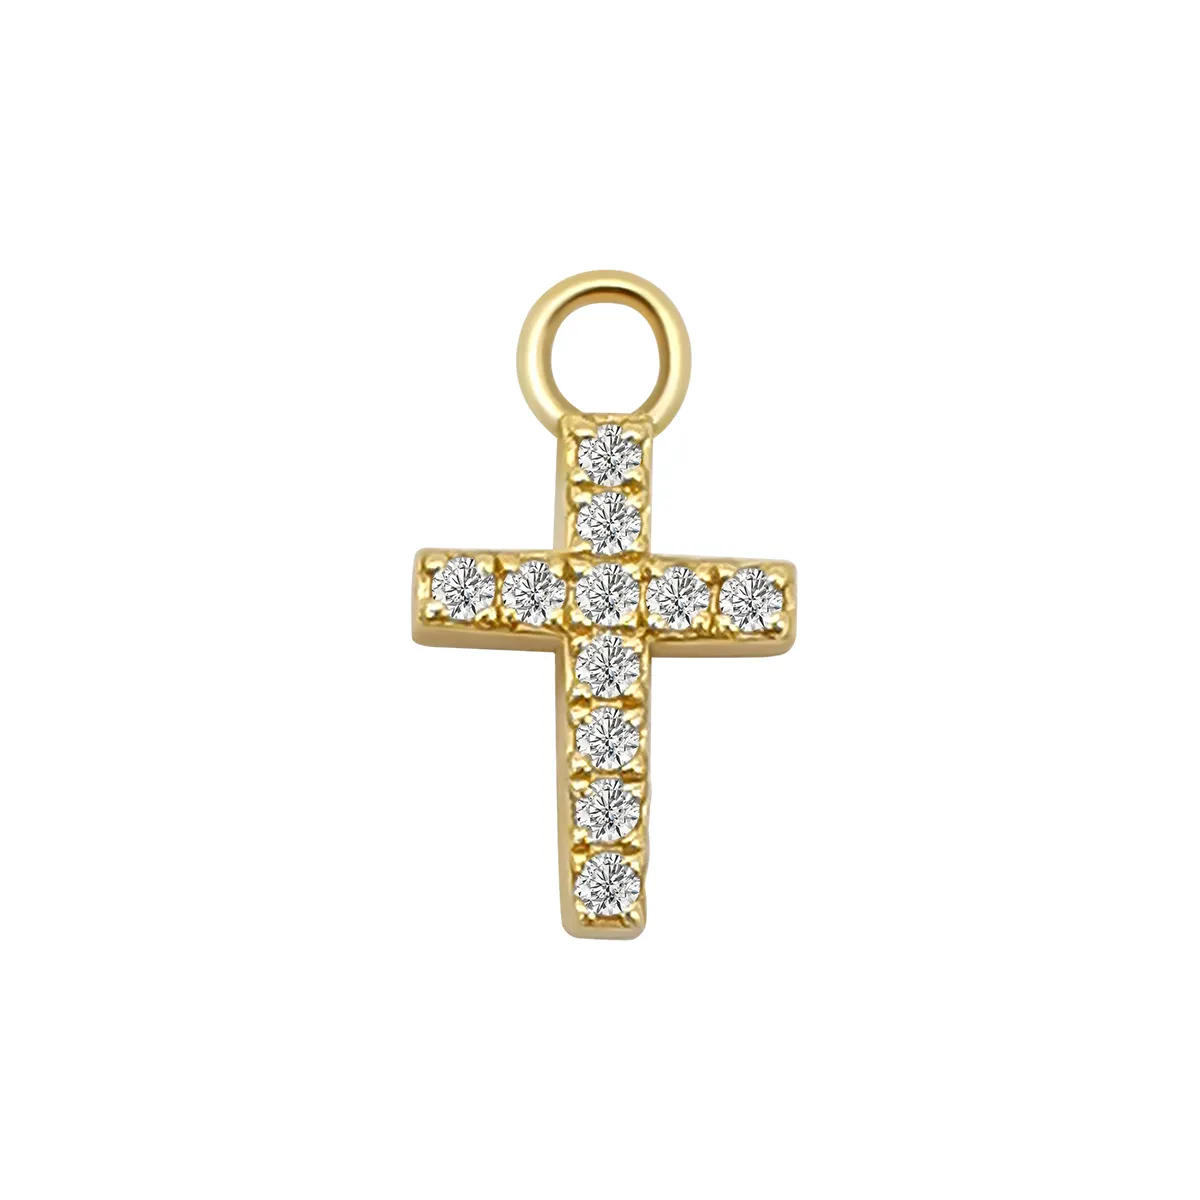 Fine Jewelry 14K Gold Jewelry Findings   Components Cross Charms with Moissanite for Rings Bracelets Necklaces DIY